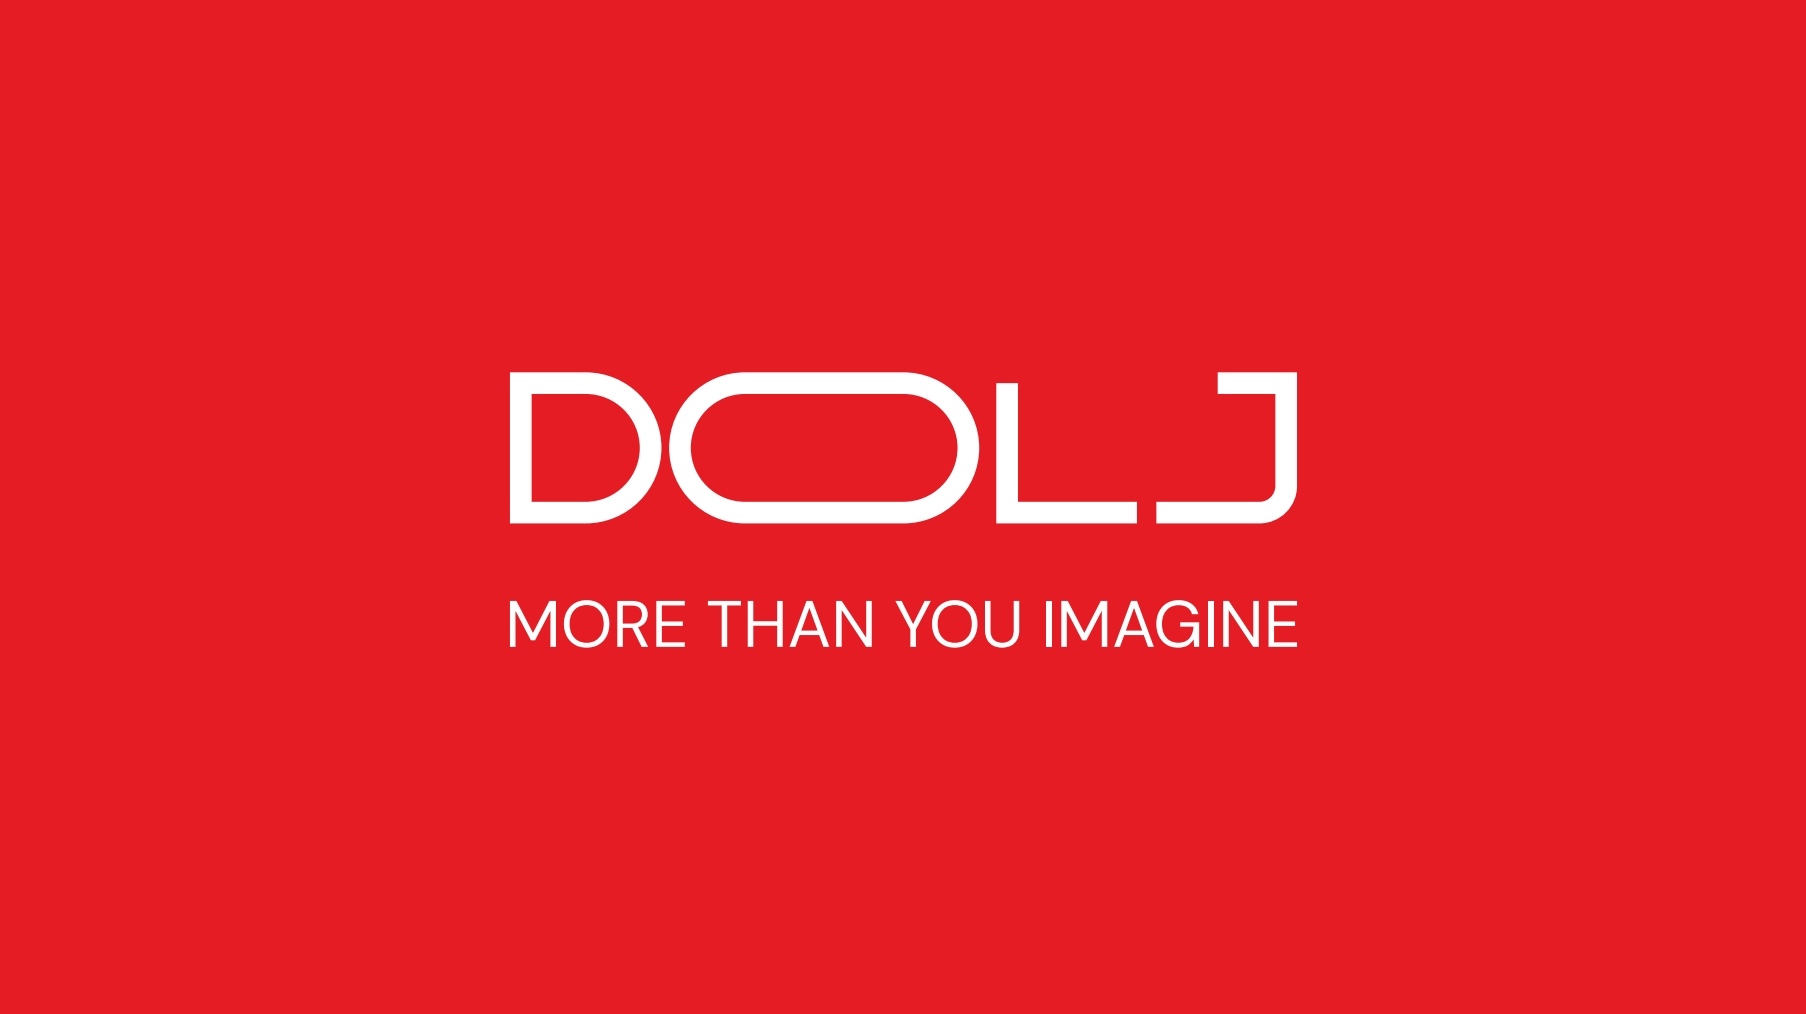 #MoreThanYouImagine. Dolj officially has a tourism strategy, and the institutions and the business environment joined hands to implement it